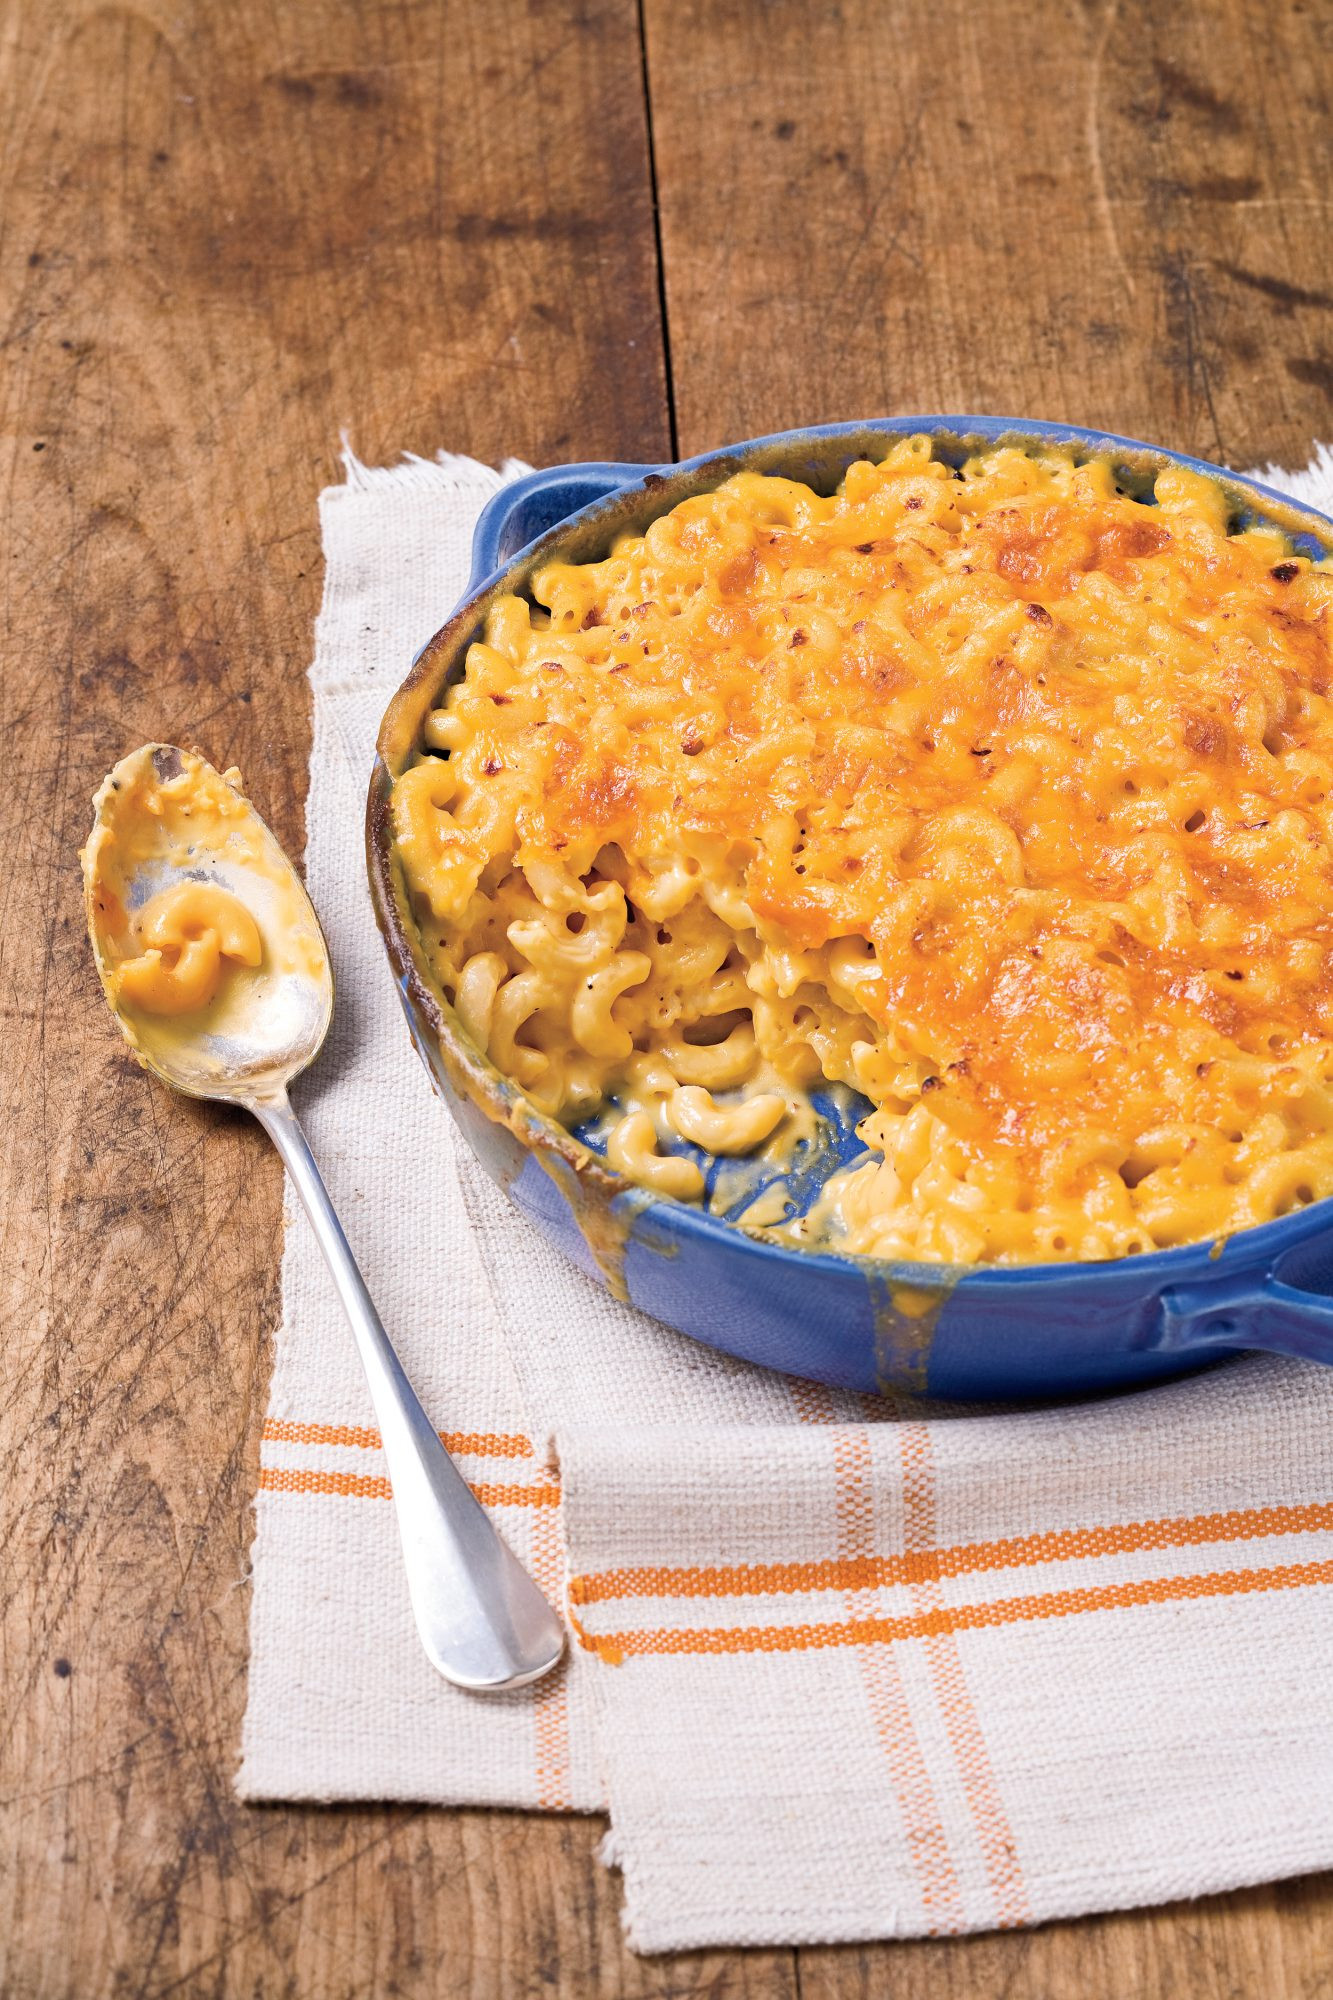 Baked Macaroni And Cheese With Box Mix
 Baked Macaroni and Cheese Recipes